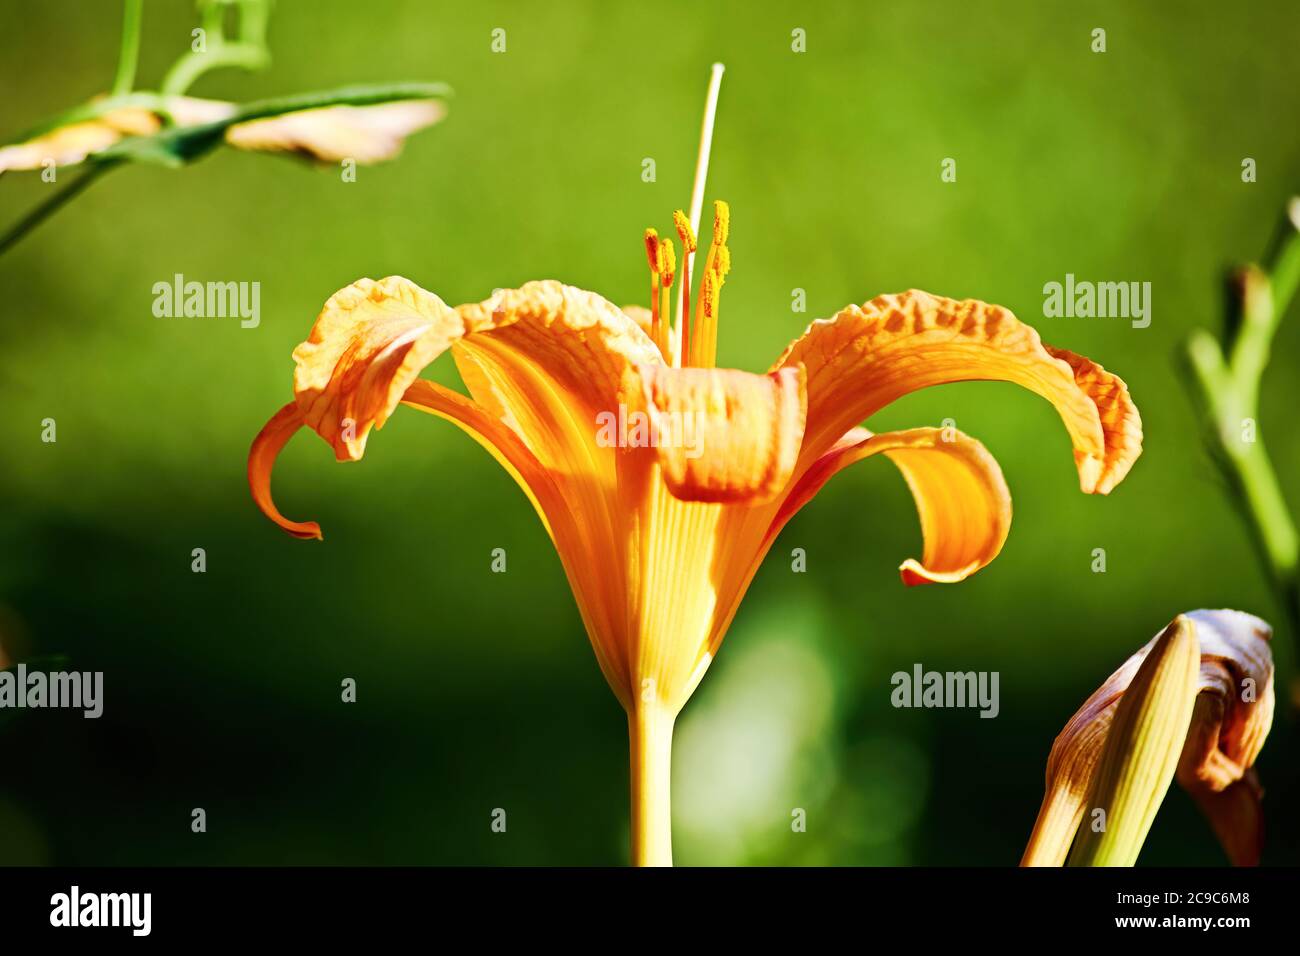 Gentle orange lily in the garden in the yard. Floral background textures. Stock Photo